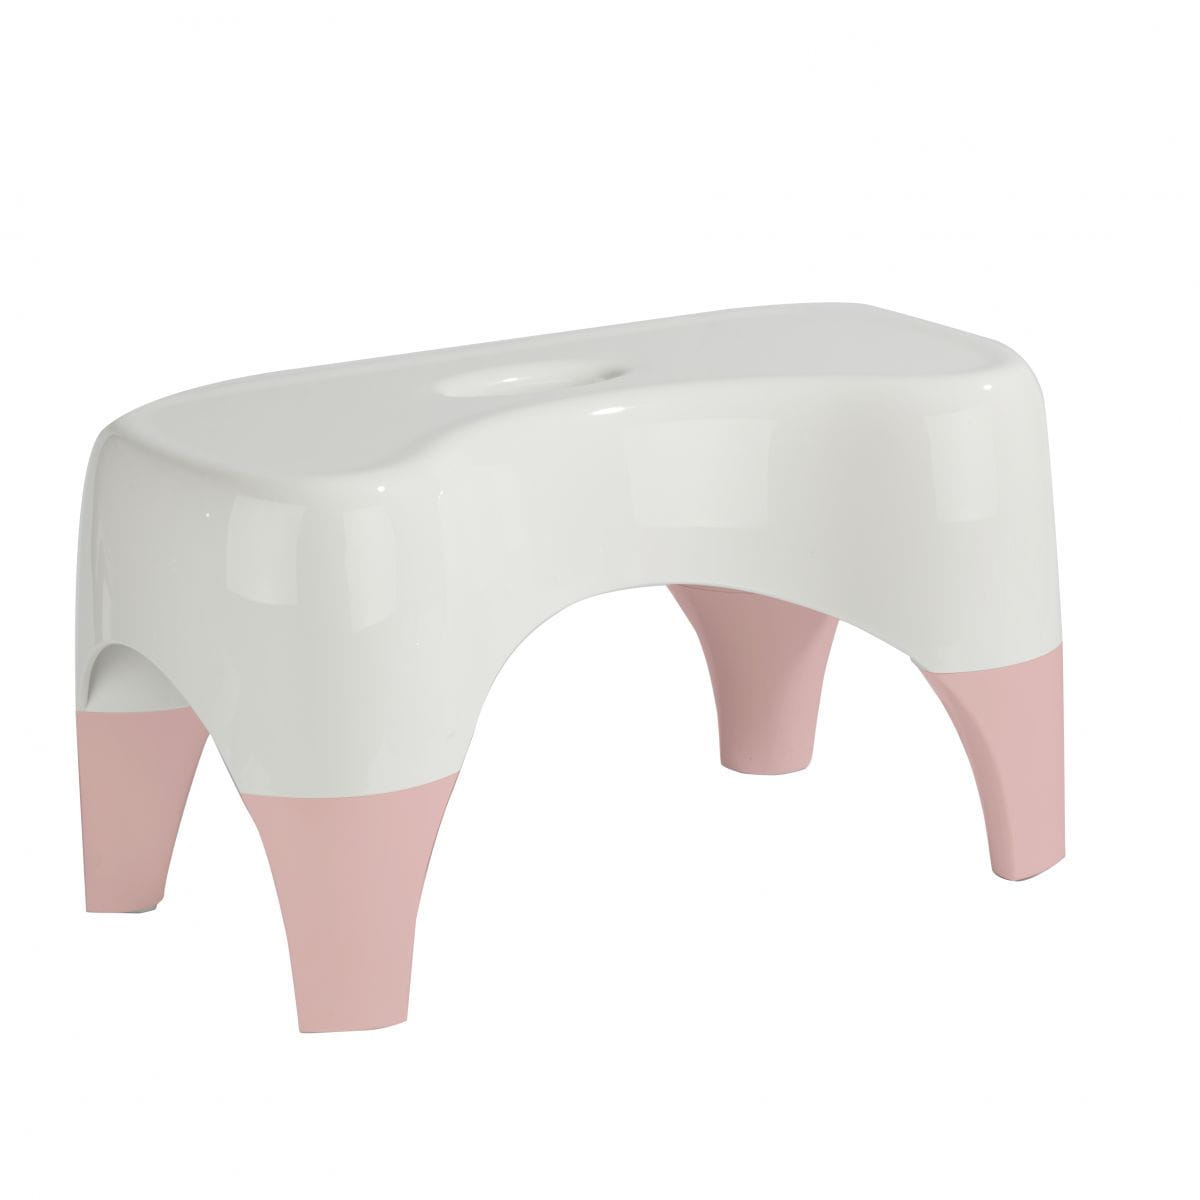 Toilet Stool for Adults and Kids